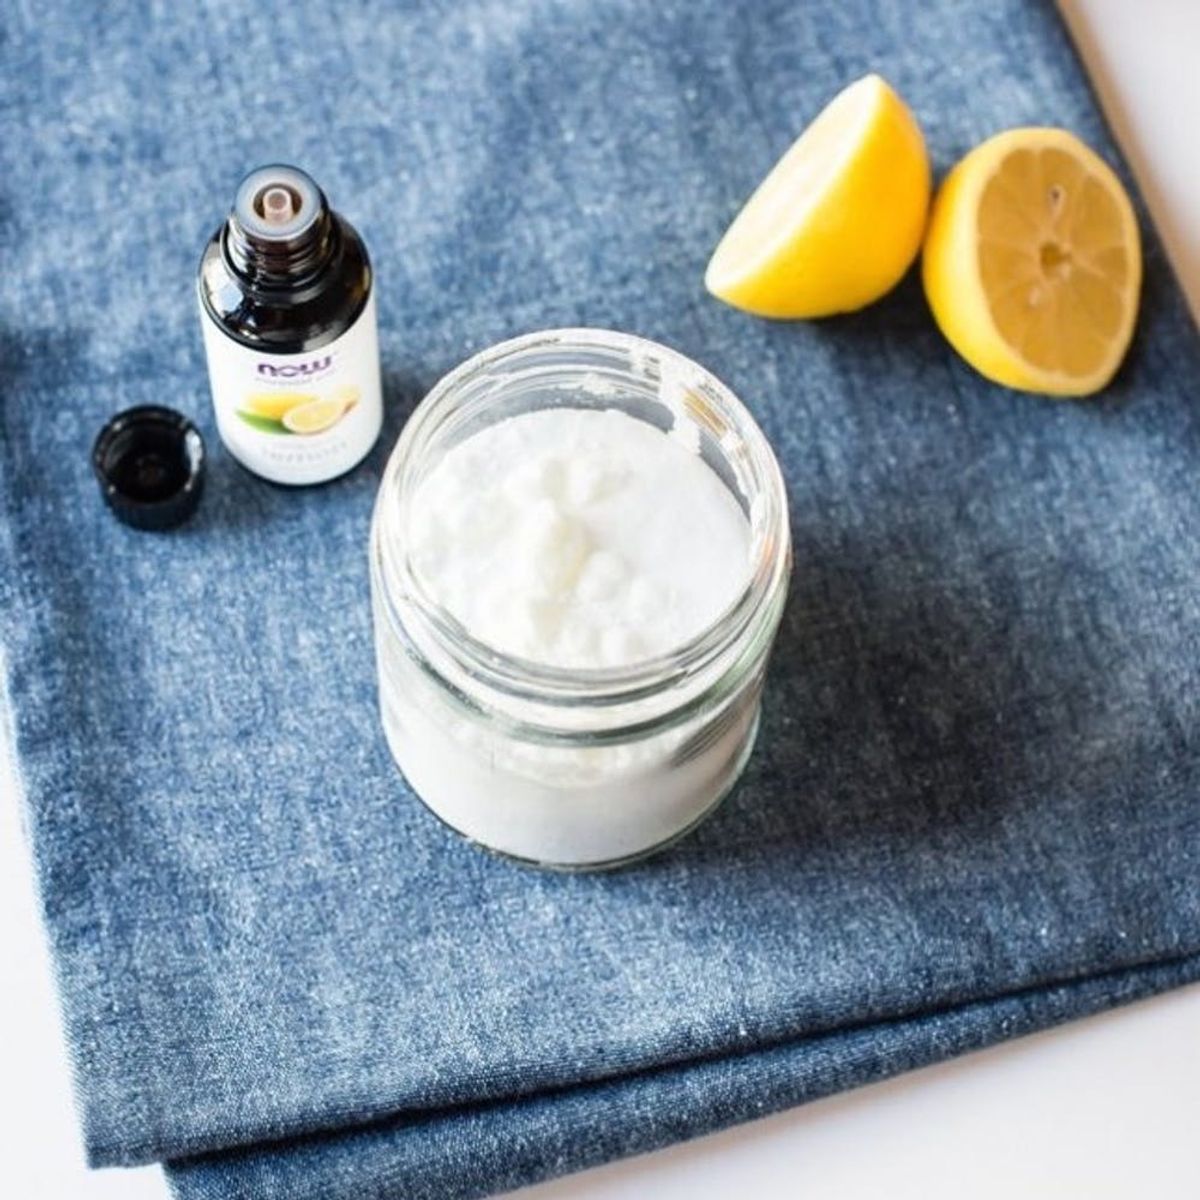 15 Chemical-Free Household Cleaners You Can Make Yourself